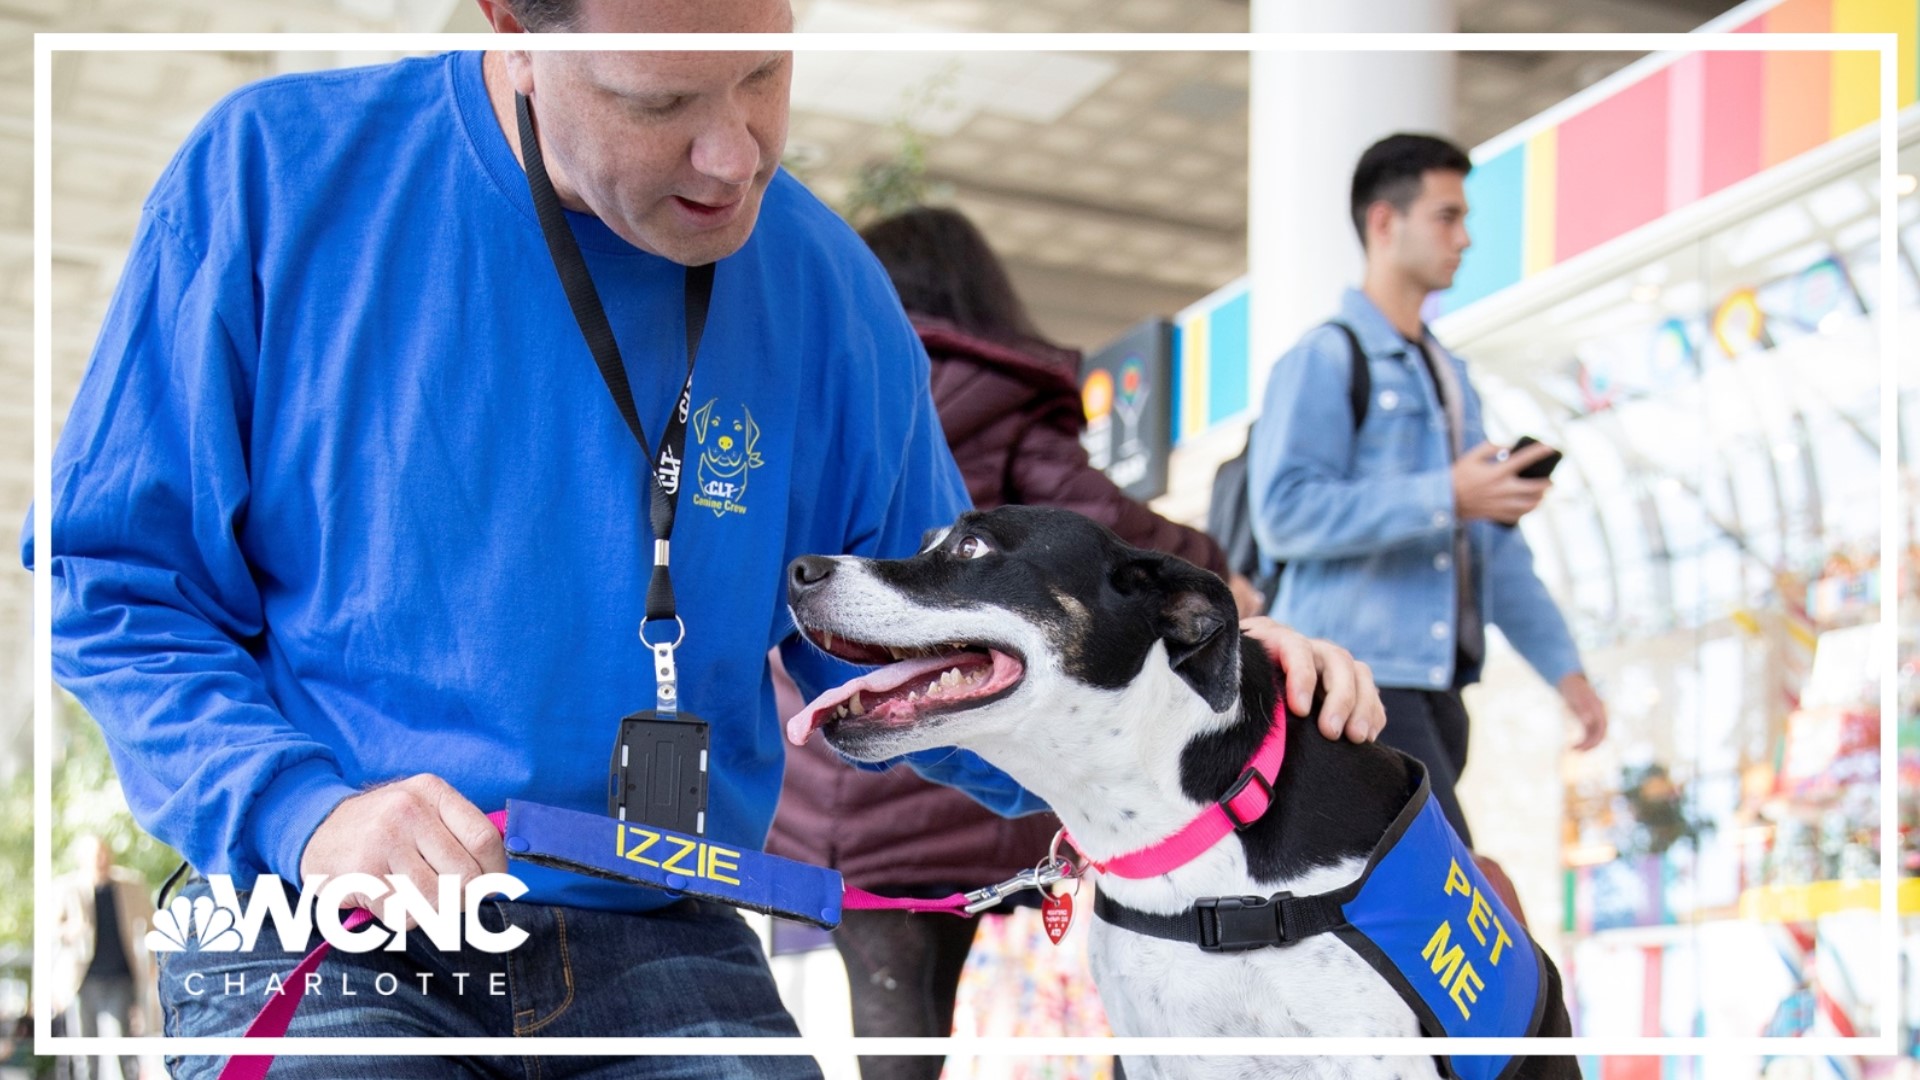 Canine Crew volunteers welcome passengers with a smile and a wagging tail, spread joy through positive interactions, and help calm stressed passengers.